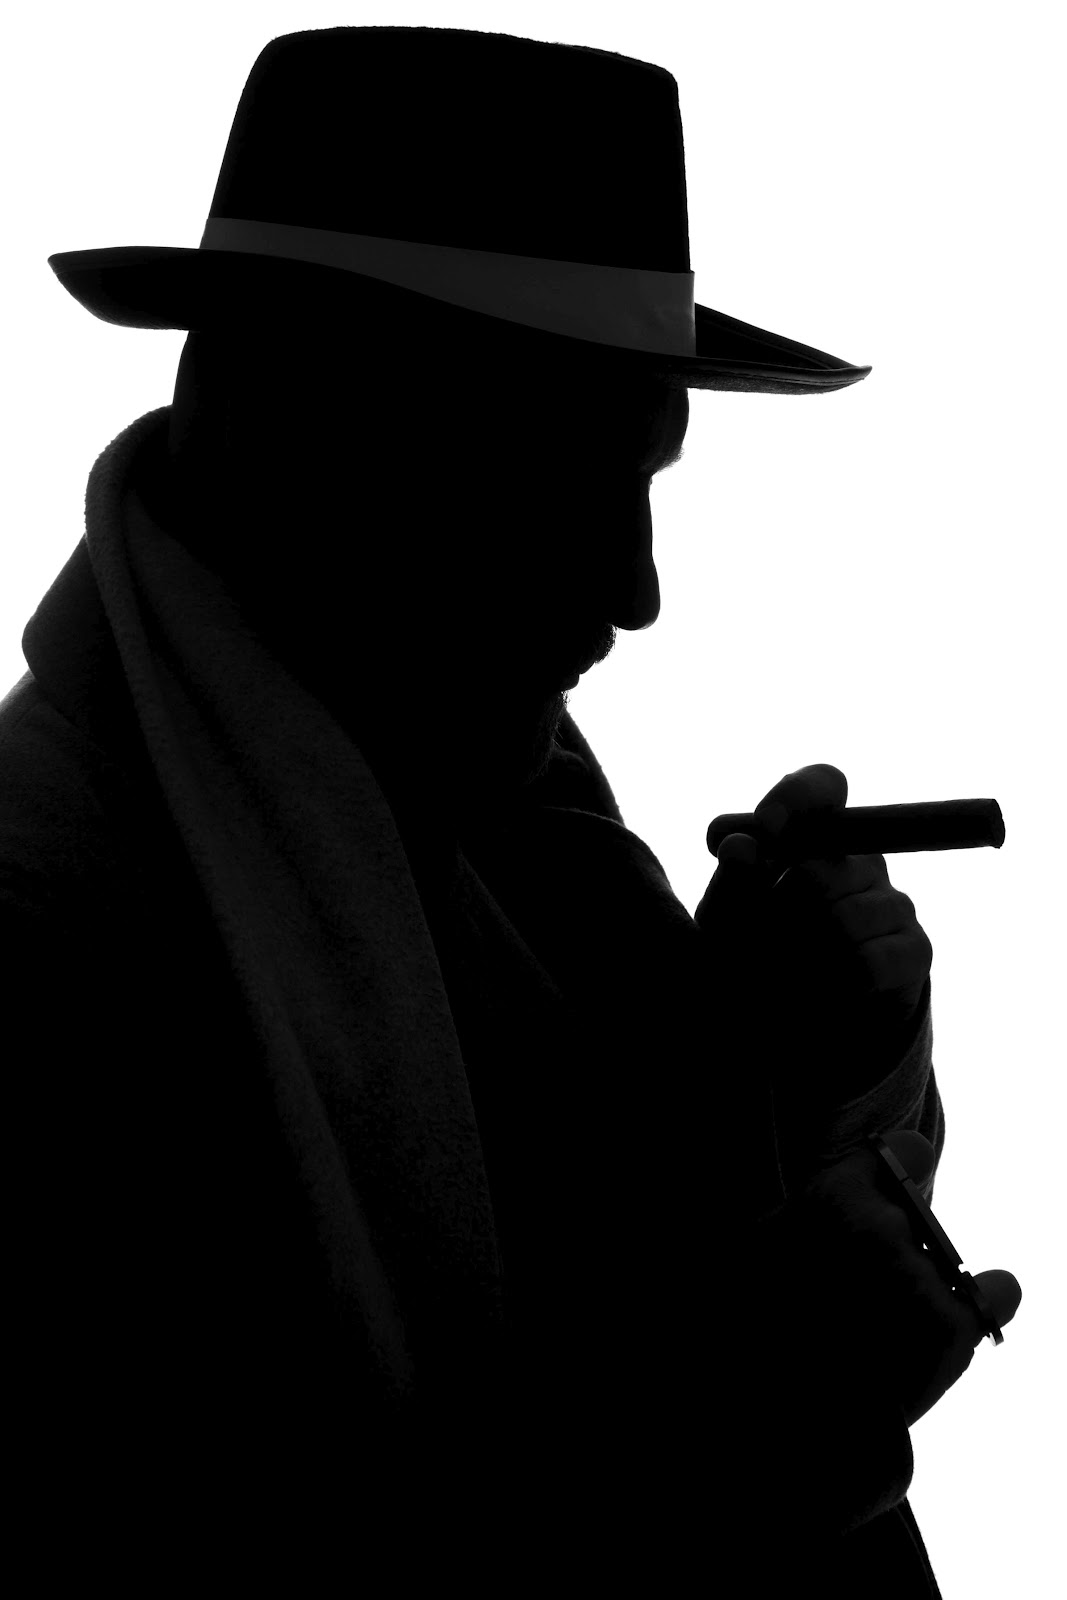 Mobster PNG HD - 131819